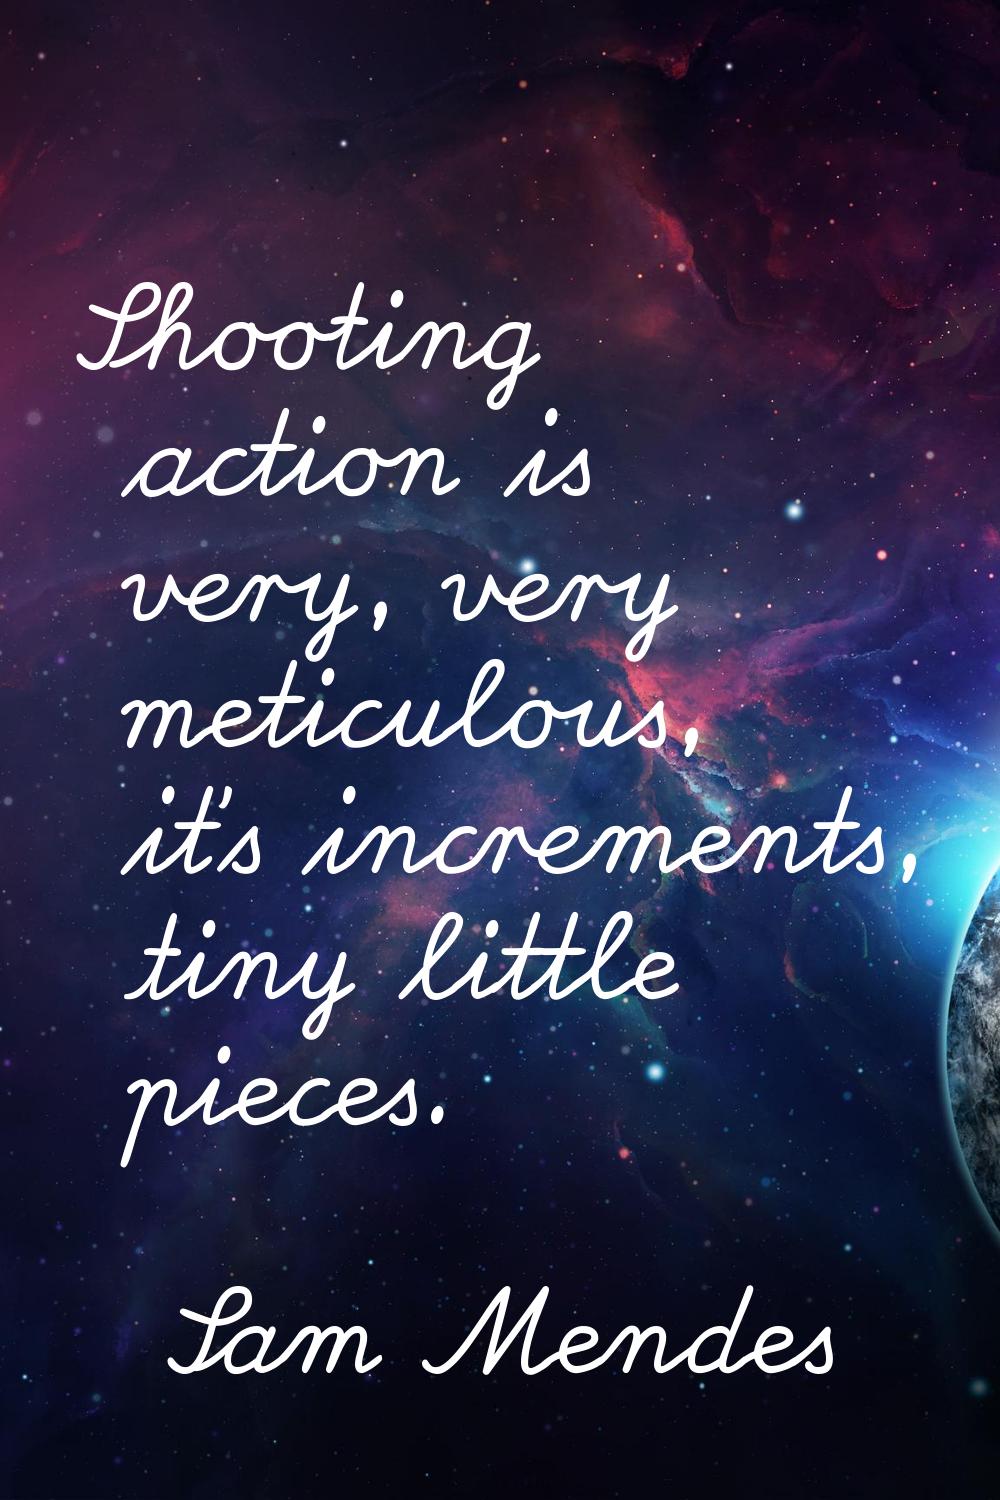 Shooting action is very, very meticulous, it's increments, tiny little pieces.